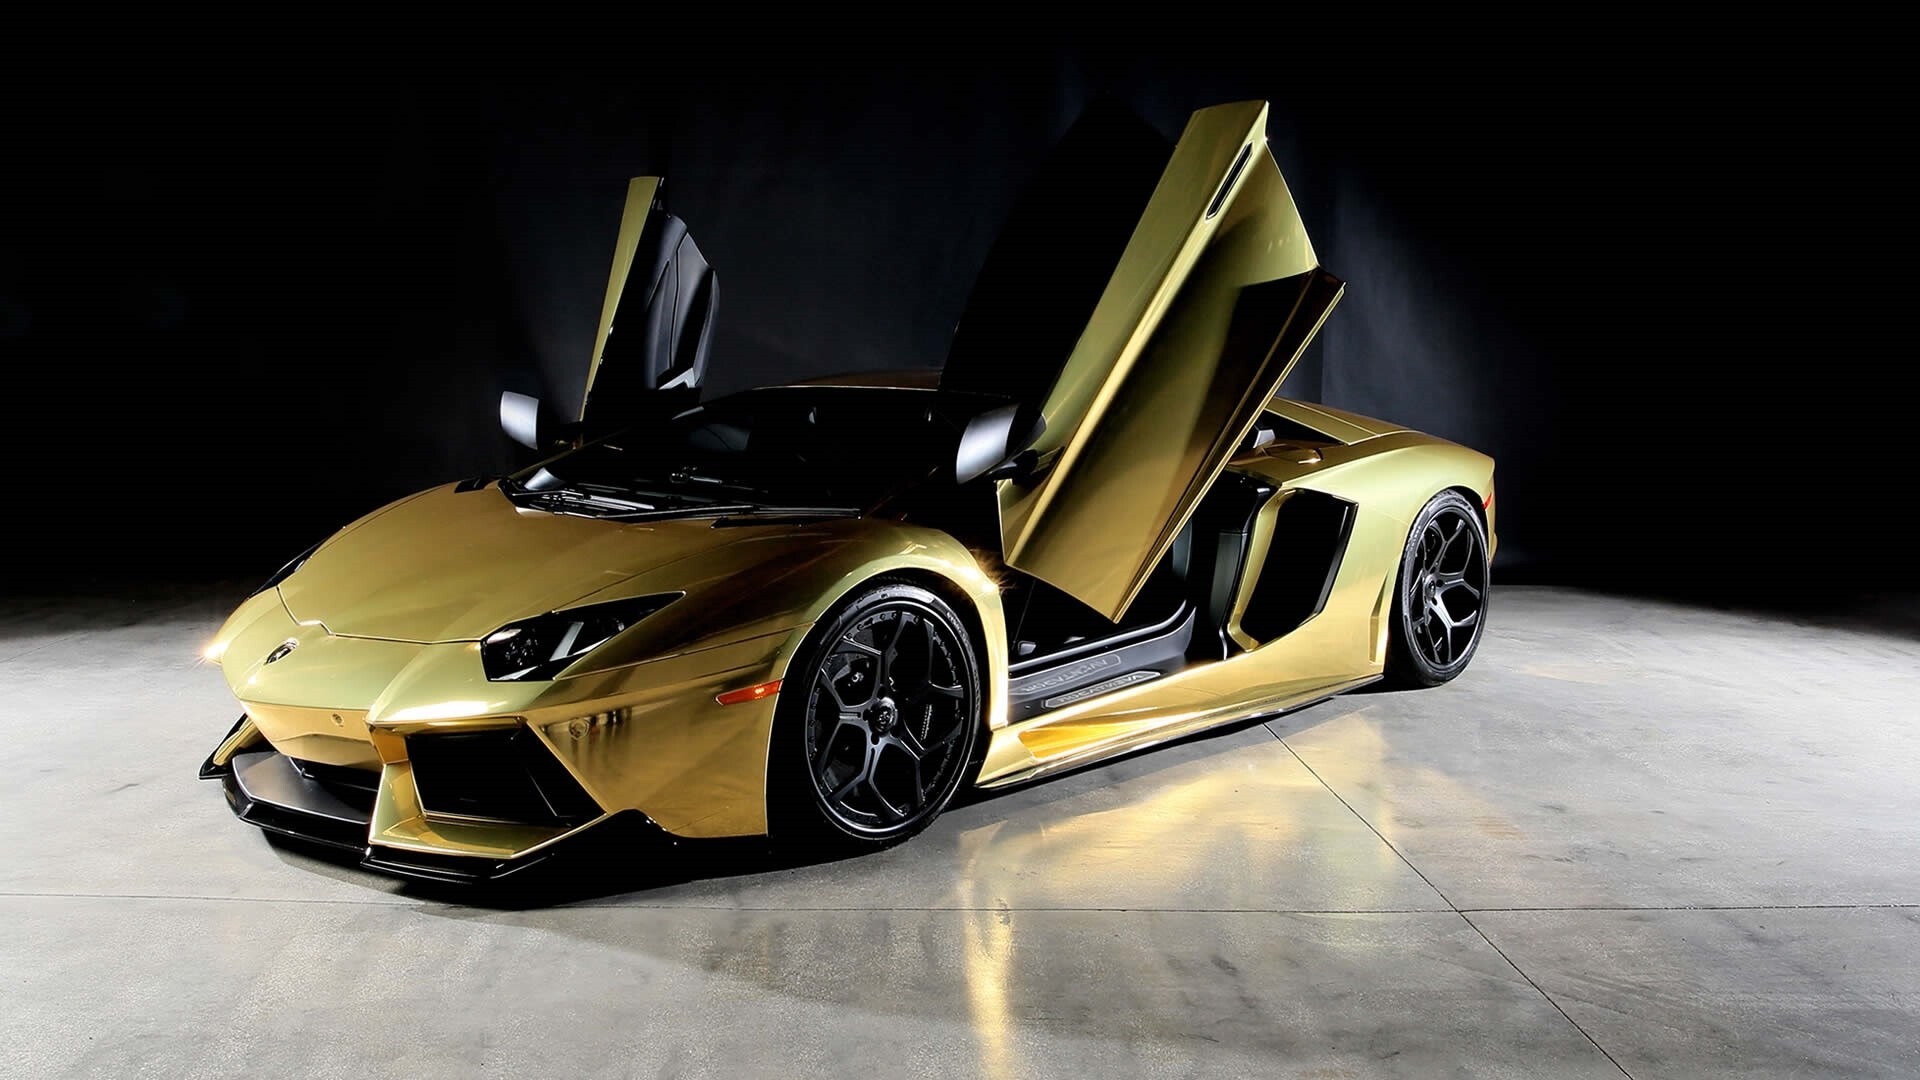 Gold Lamborghini: Aventador LP 780-4 Ultimae, The last variant of the Aventador announced in 2021. 1920x1080 Full HD Background.